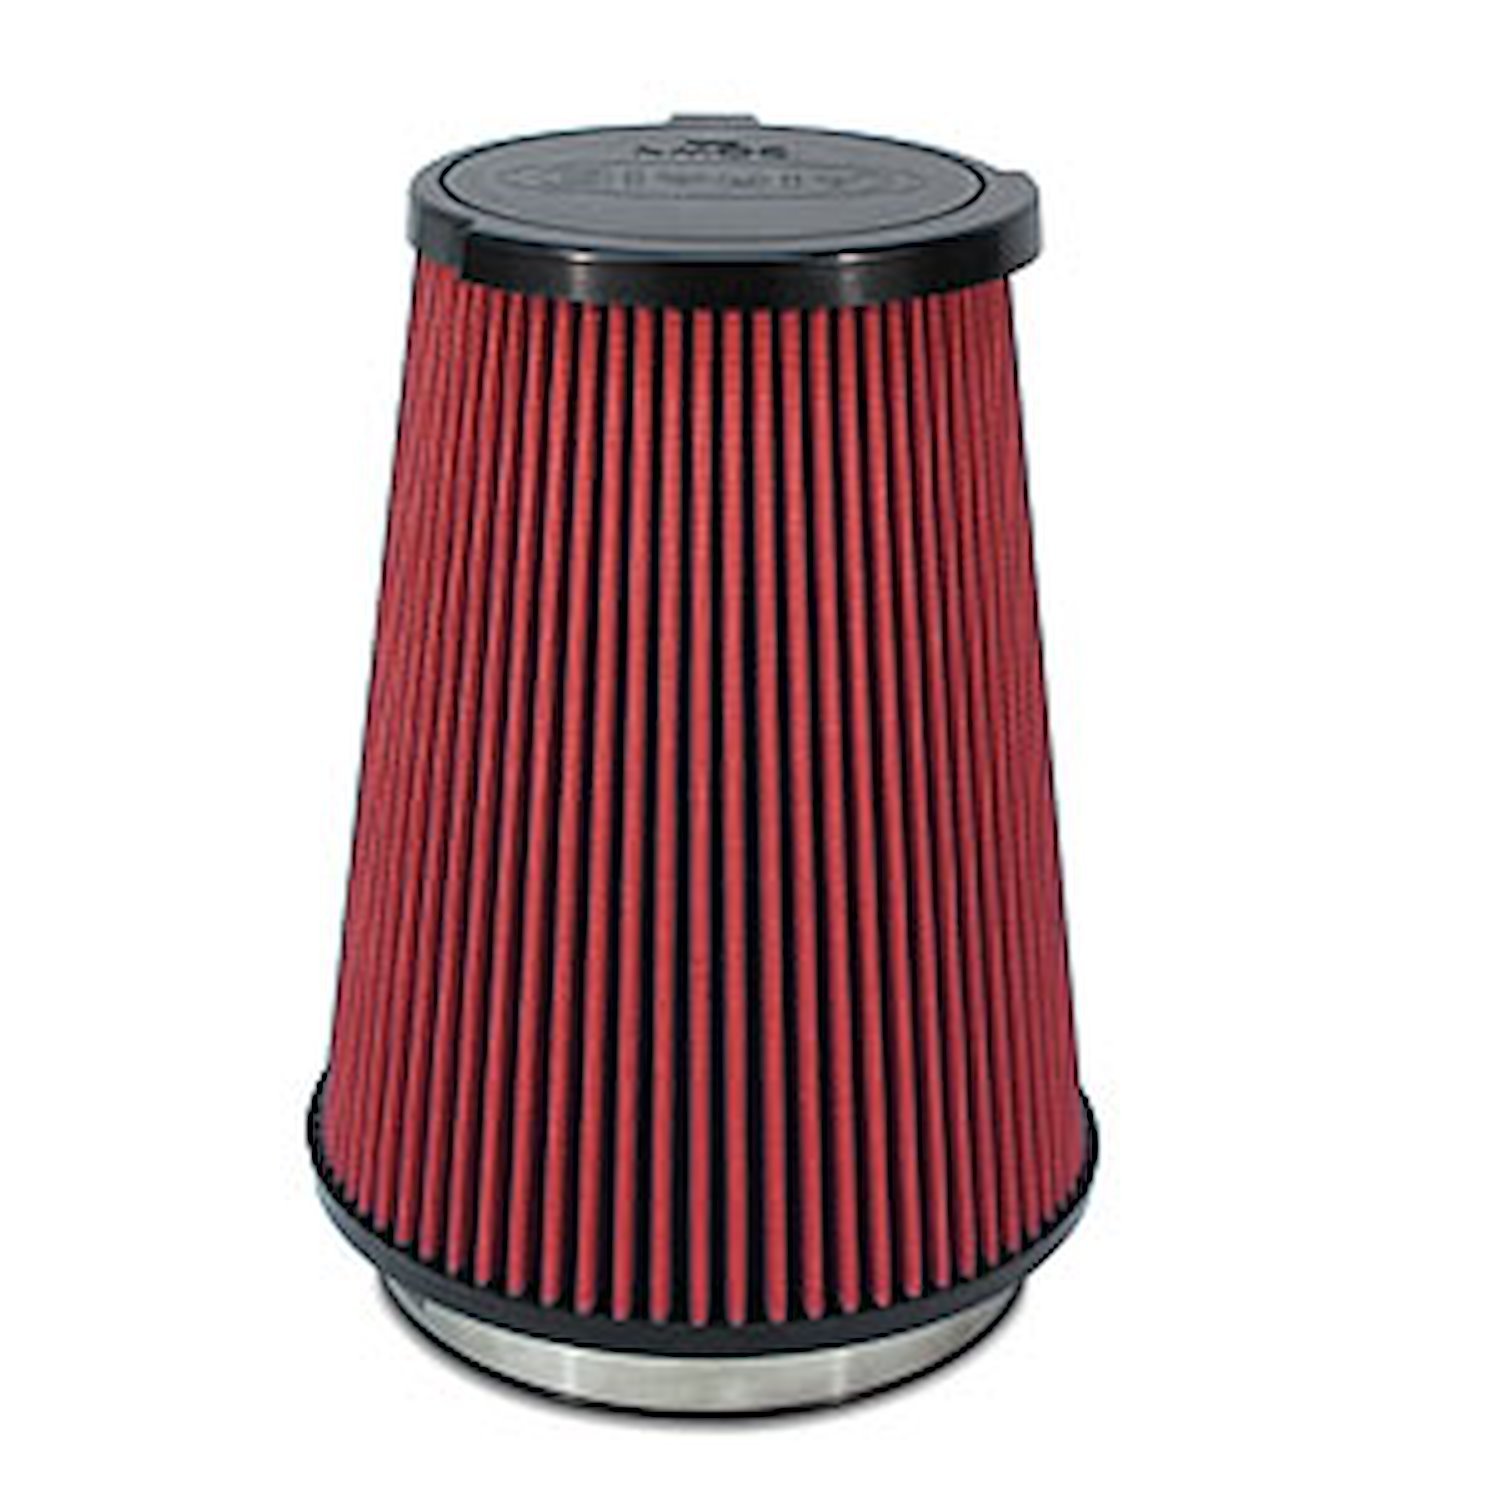 SynthaMax "Dry" OE Replacement Filter 2010-2014 Ford Shelby Mustang 5.4L Supercharged